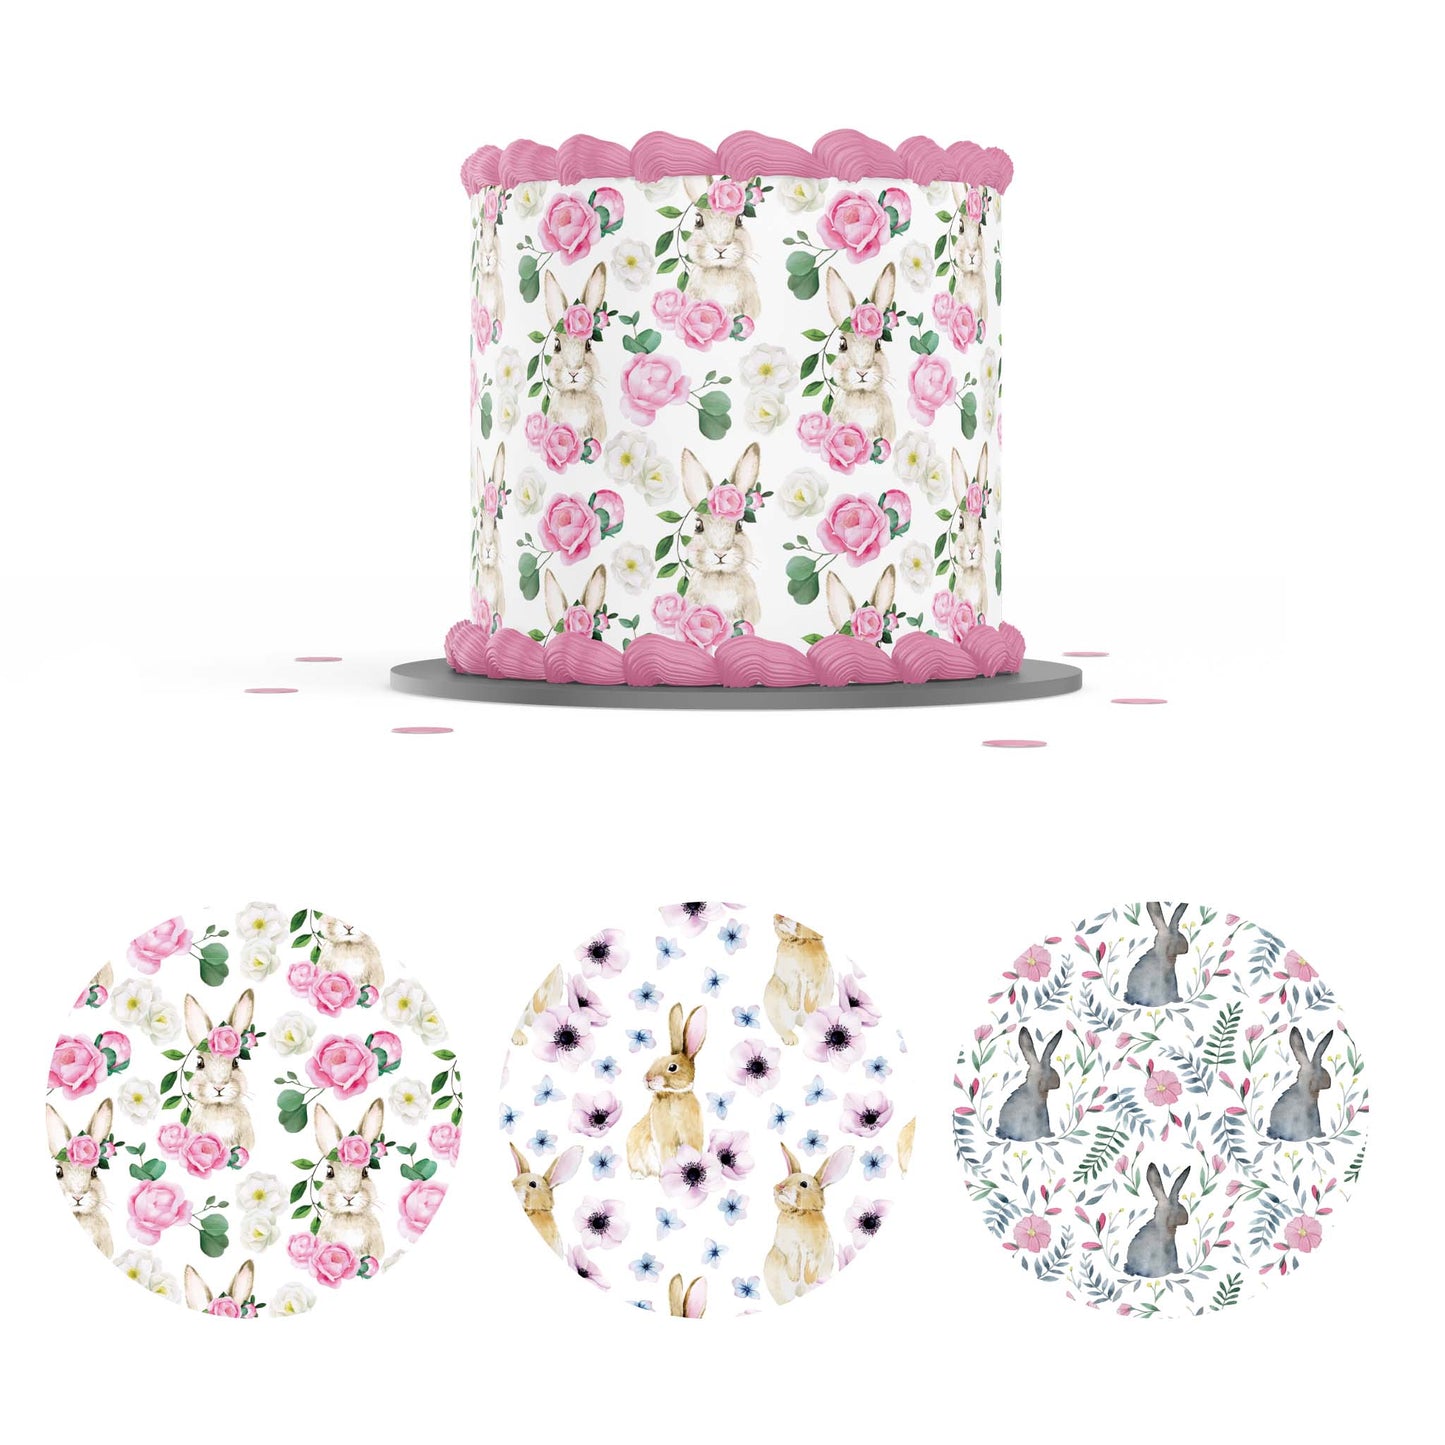 Add these gorgeous Spring Floral and Easter Bunny patterns to any Easter desserts and cakes.